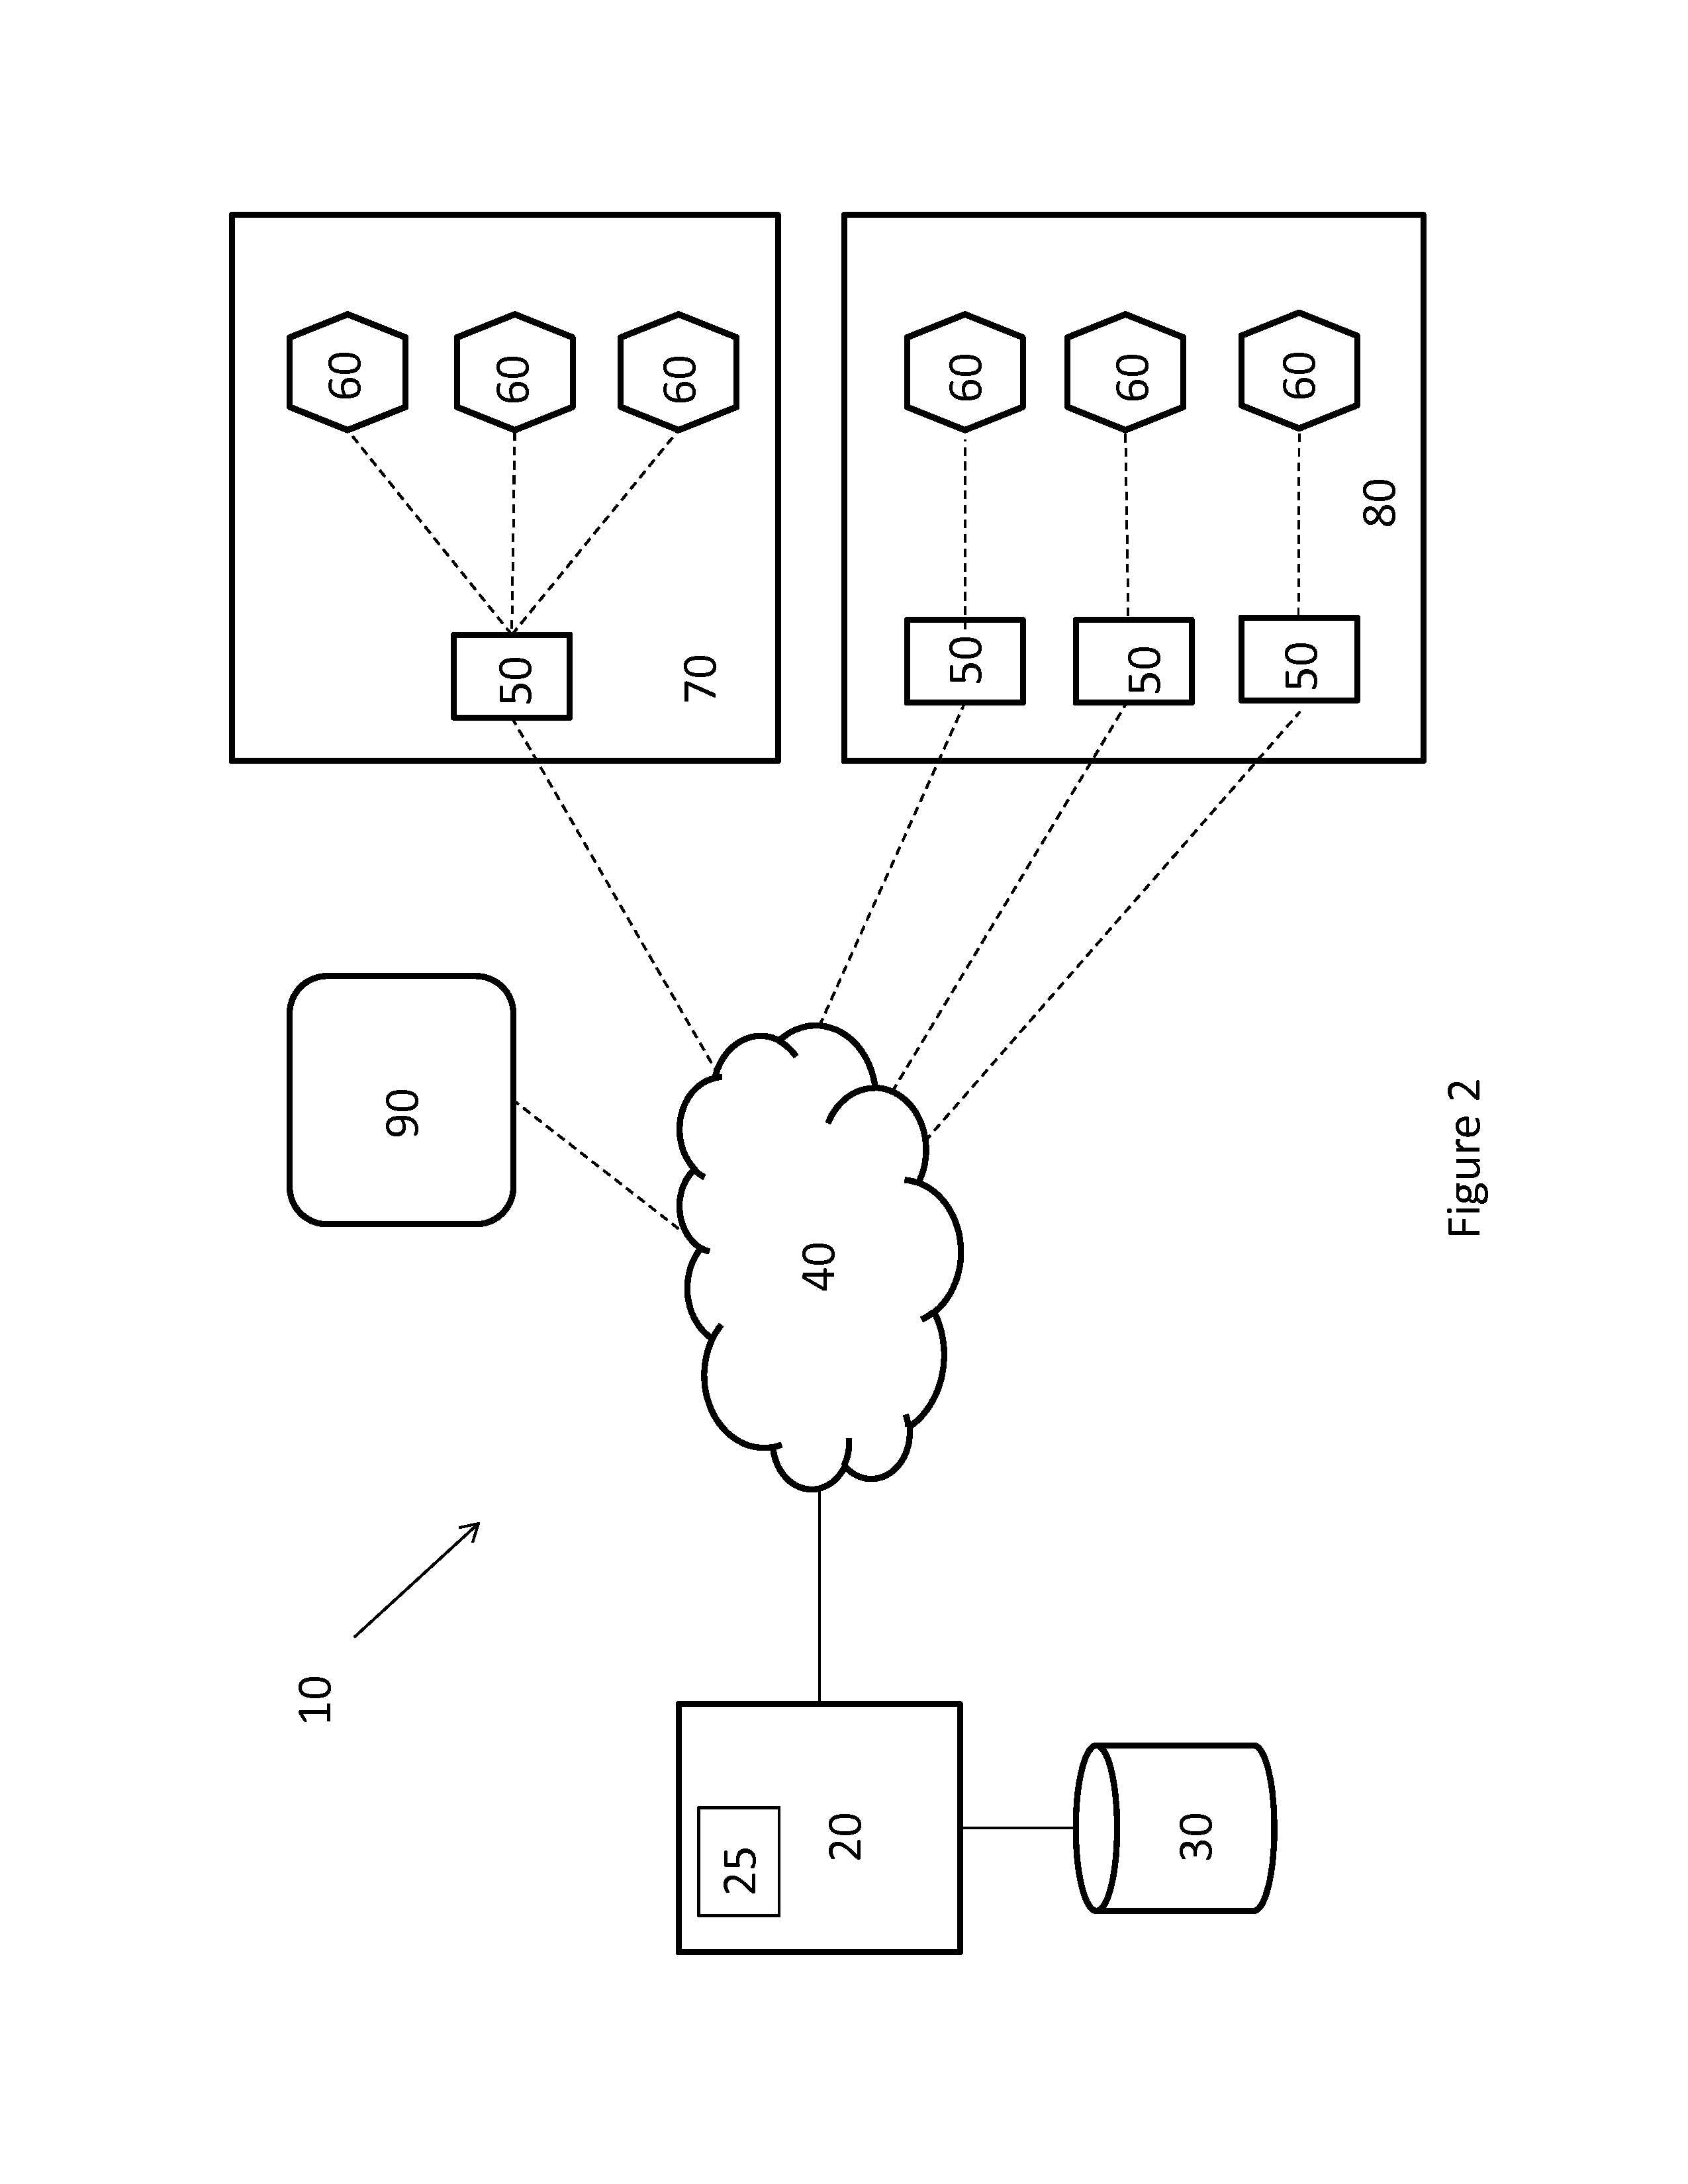 System and method of reviewing and producing documents